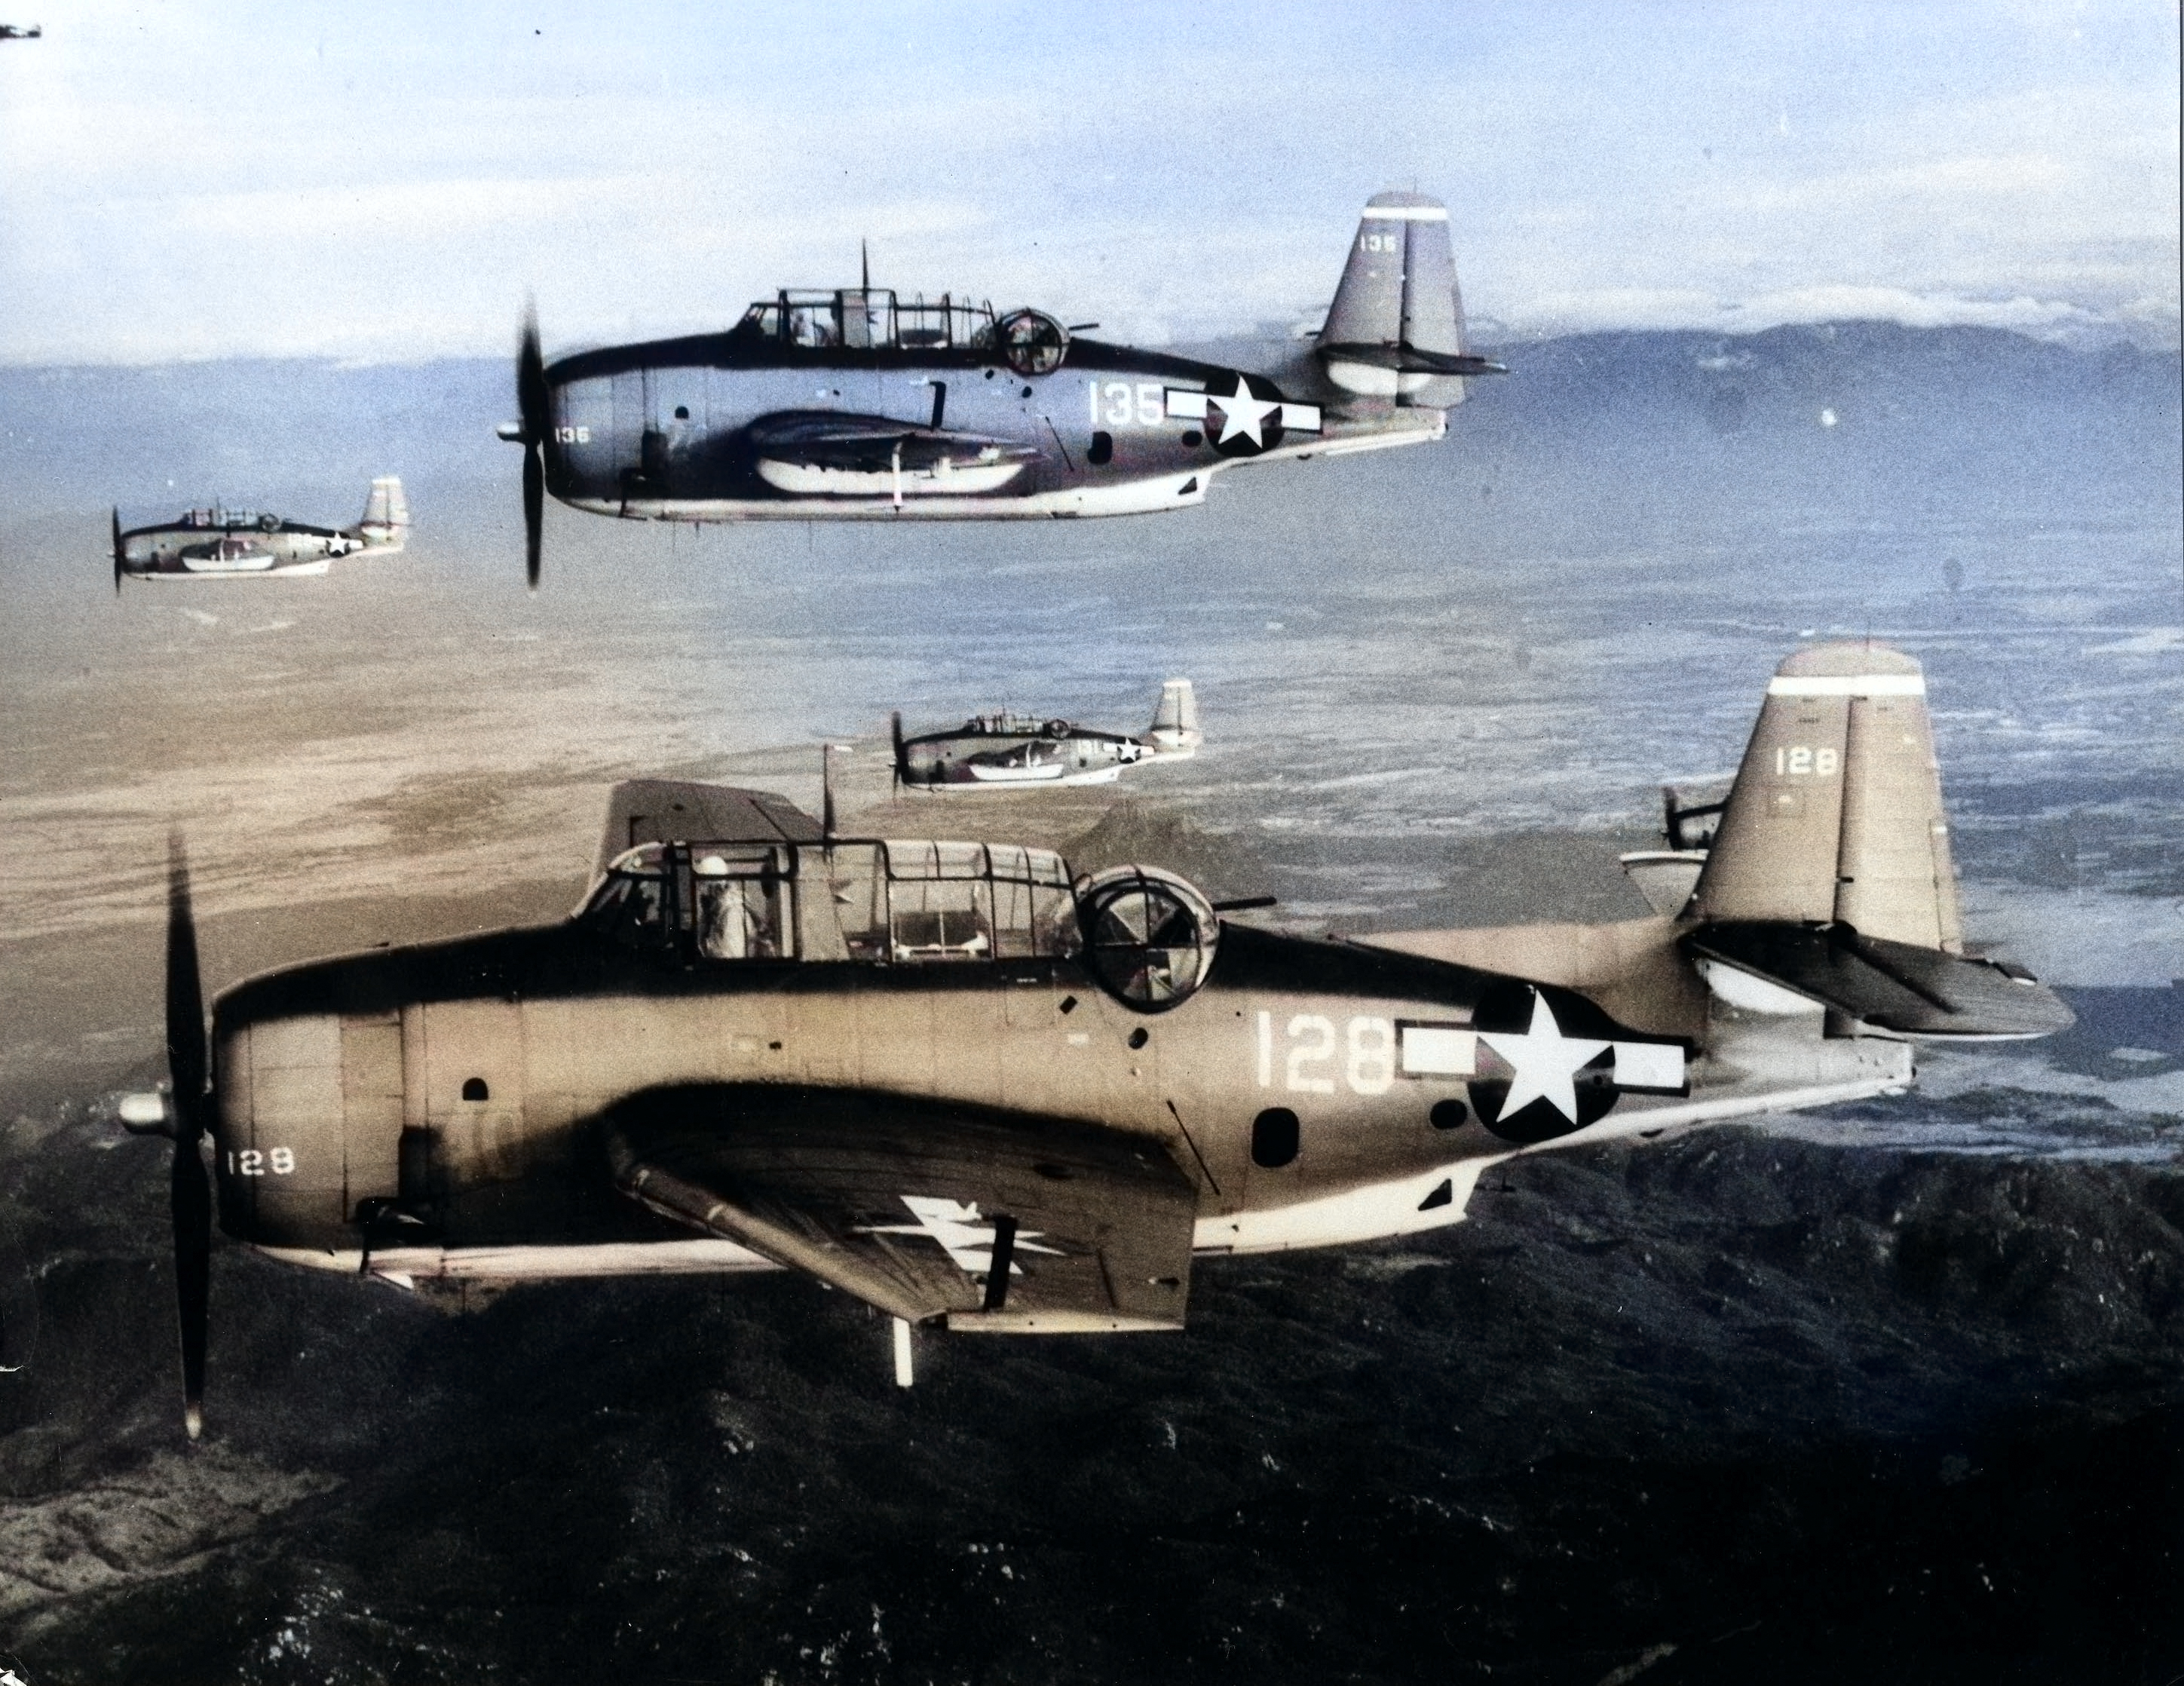 Four TBM Avengers of Torpedo Squadron 4 flying from the USS Essex on their way to strike targets along the coast of French Indochina (now Vietnam), 12 Jan 1945. [Colorized by WW2DB]